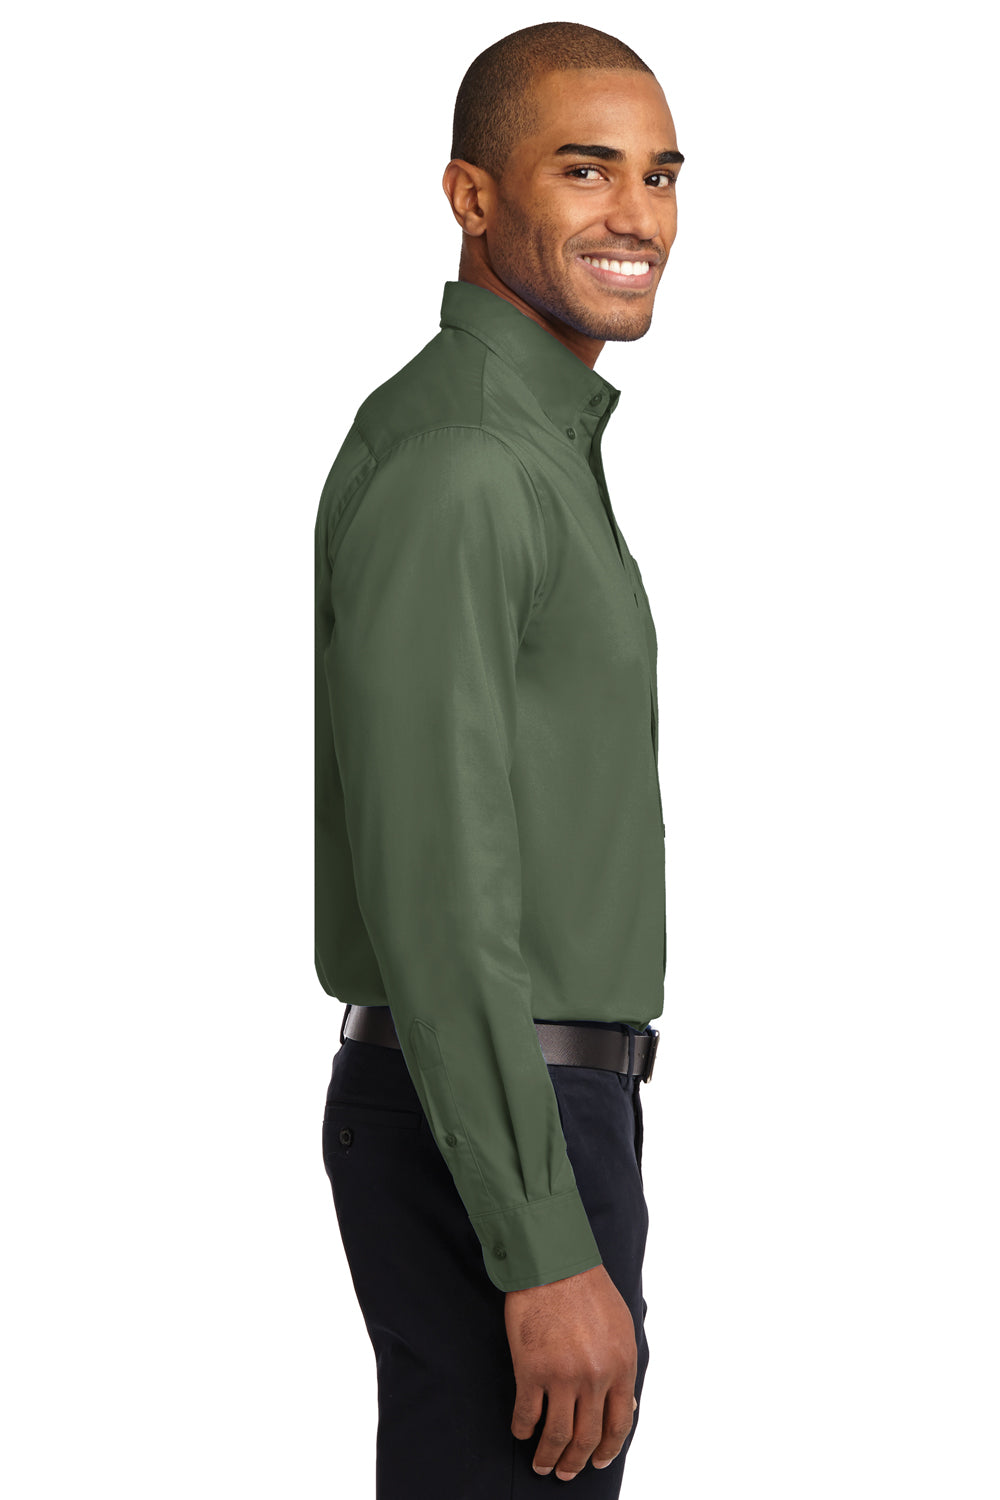 Port Authority S608/TLS608/S608ES Mens Easy Care Wrinkle Resistant Long Sleeve Button Down Shirt w/ Pocket Clover Green Side